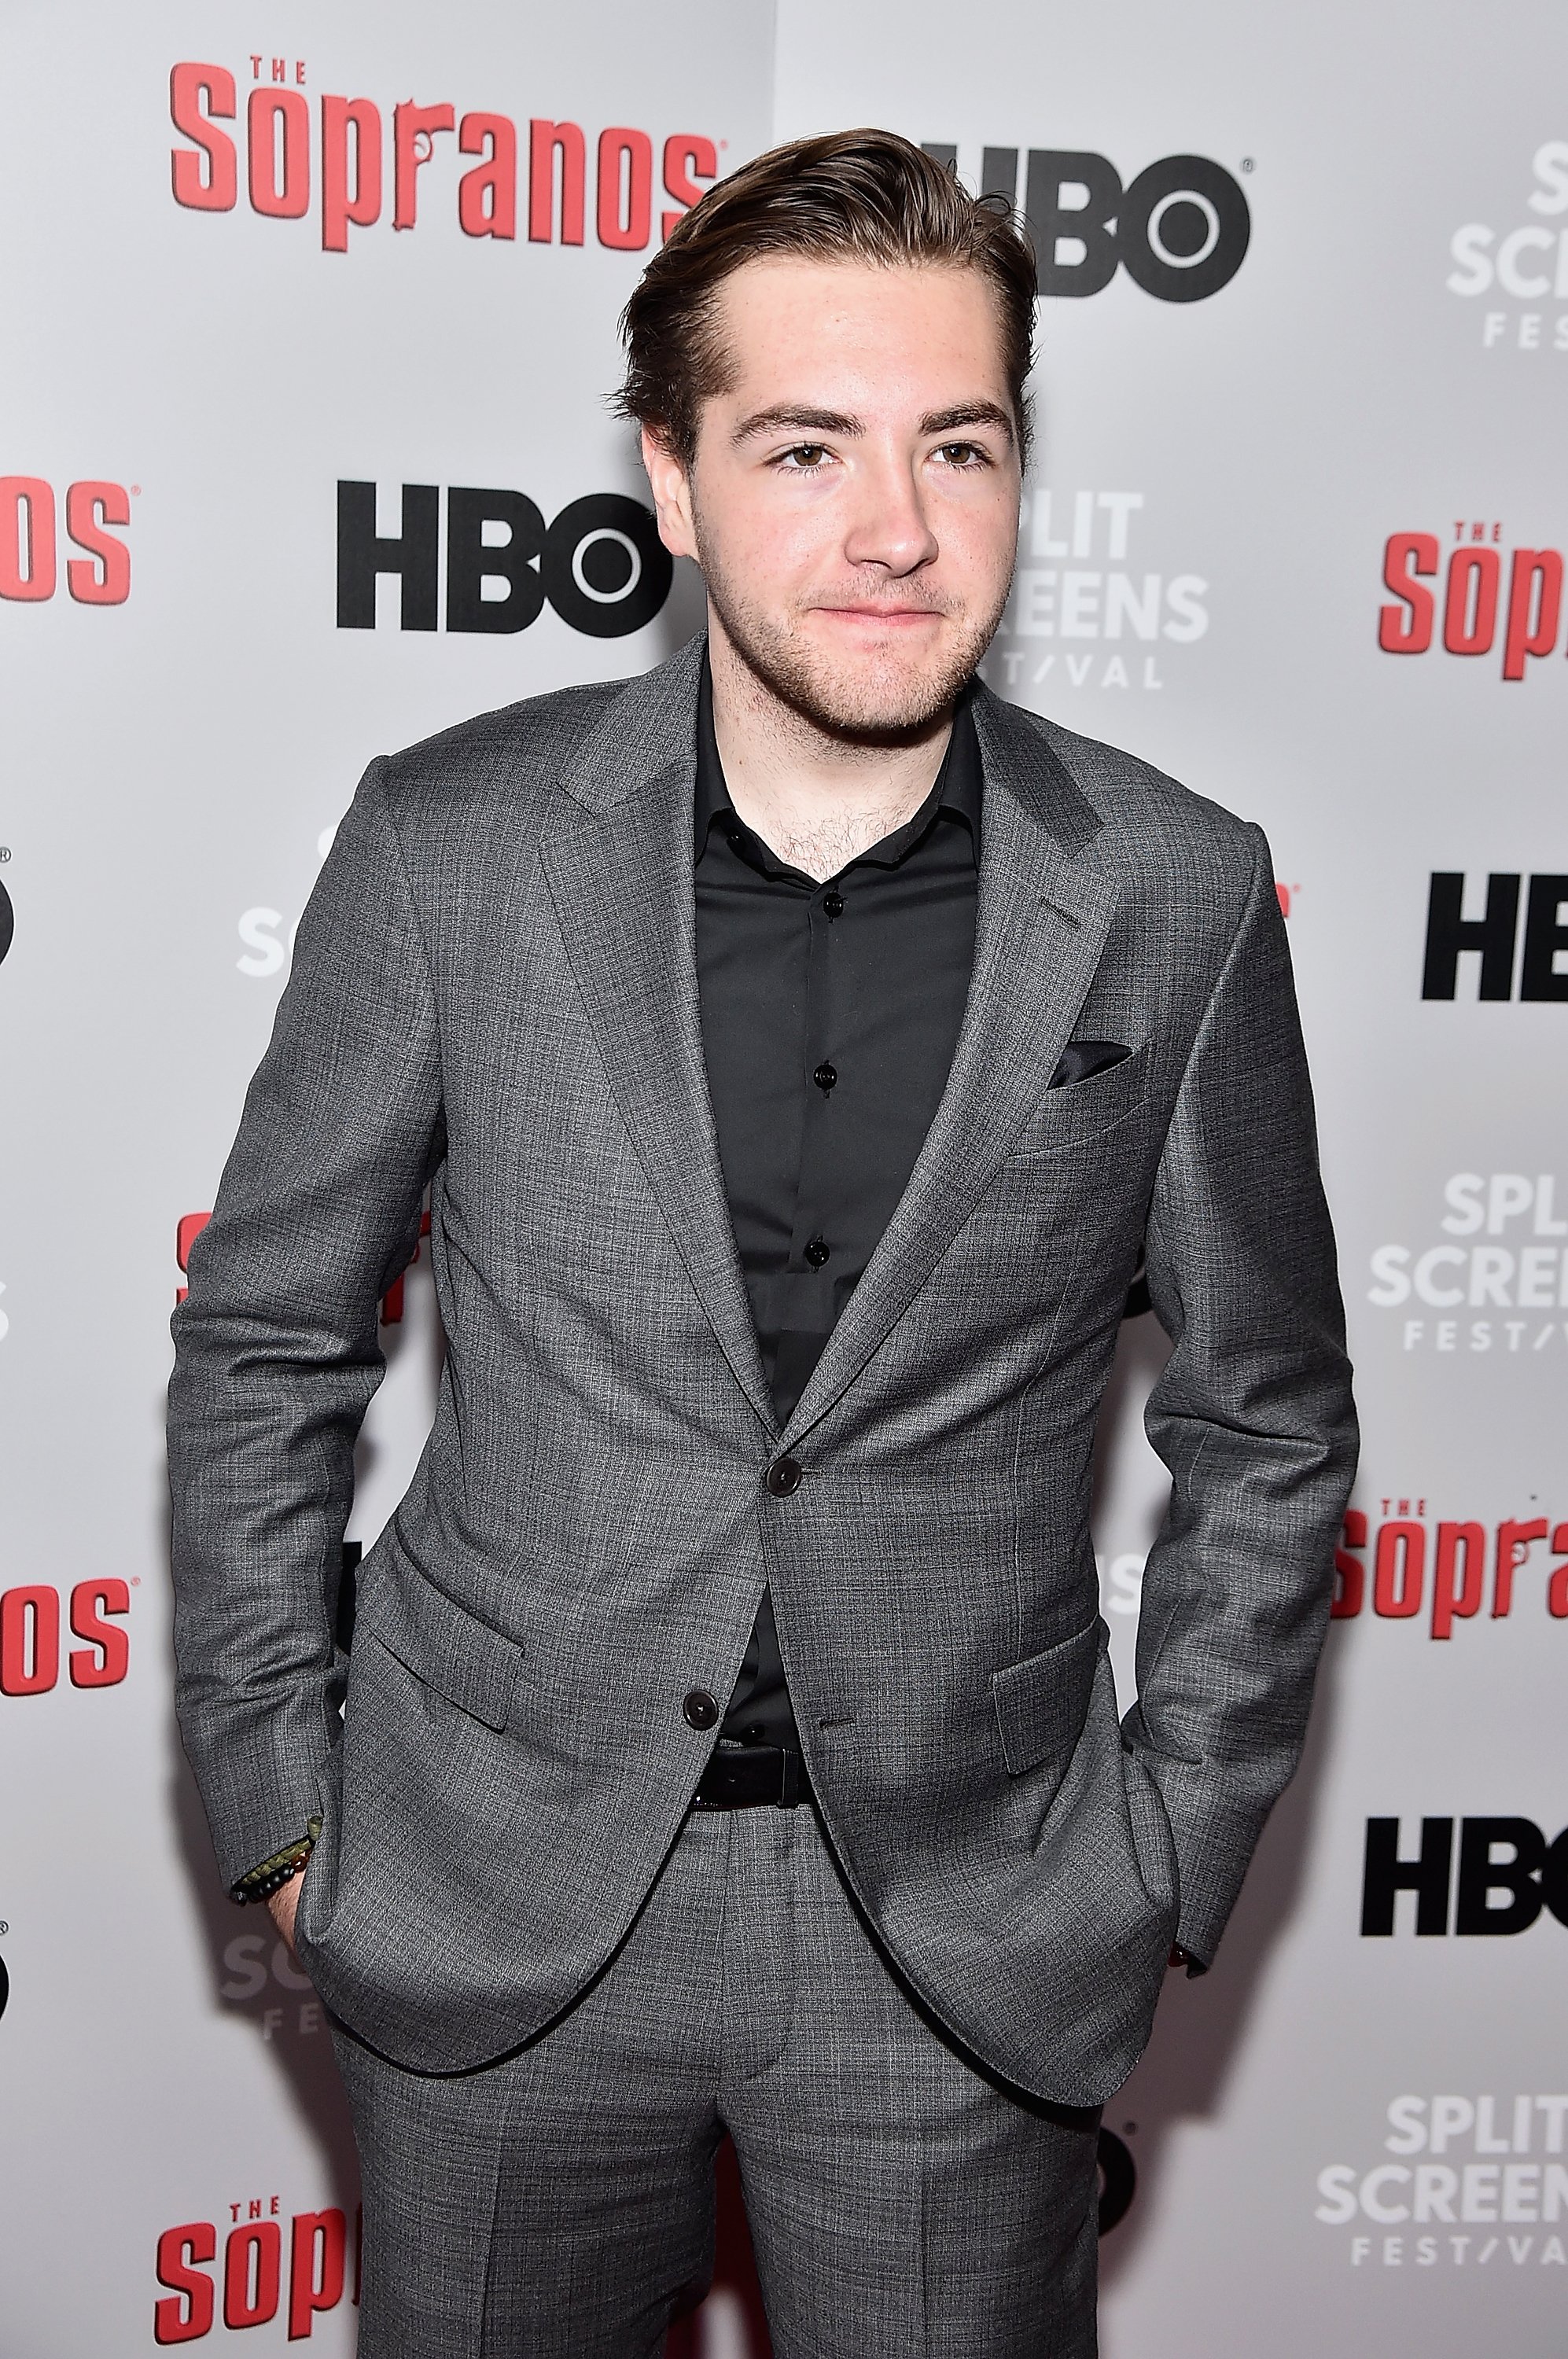 Michael Gandolfini, James's first-born son, arrives at "The Sopranos" 20th Anniversary Panel Discussion at SVA theater on January 9, 2019. | Source: Theo Wargo/Getty Images